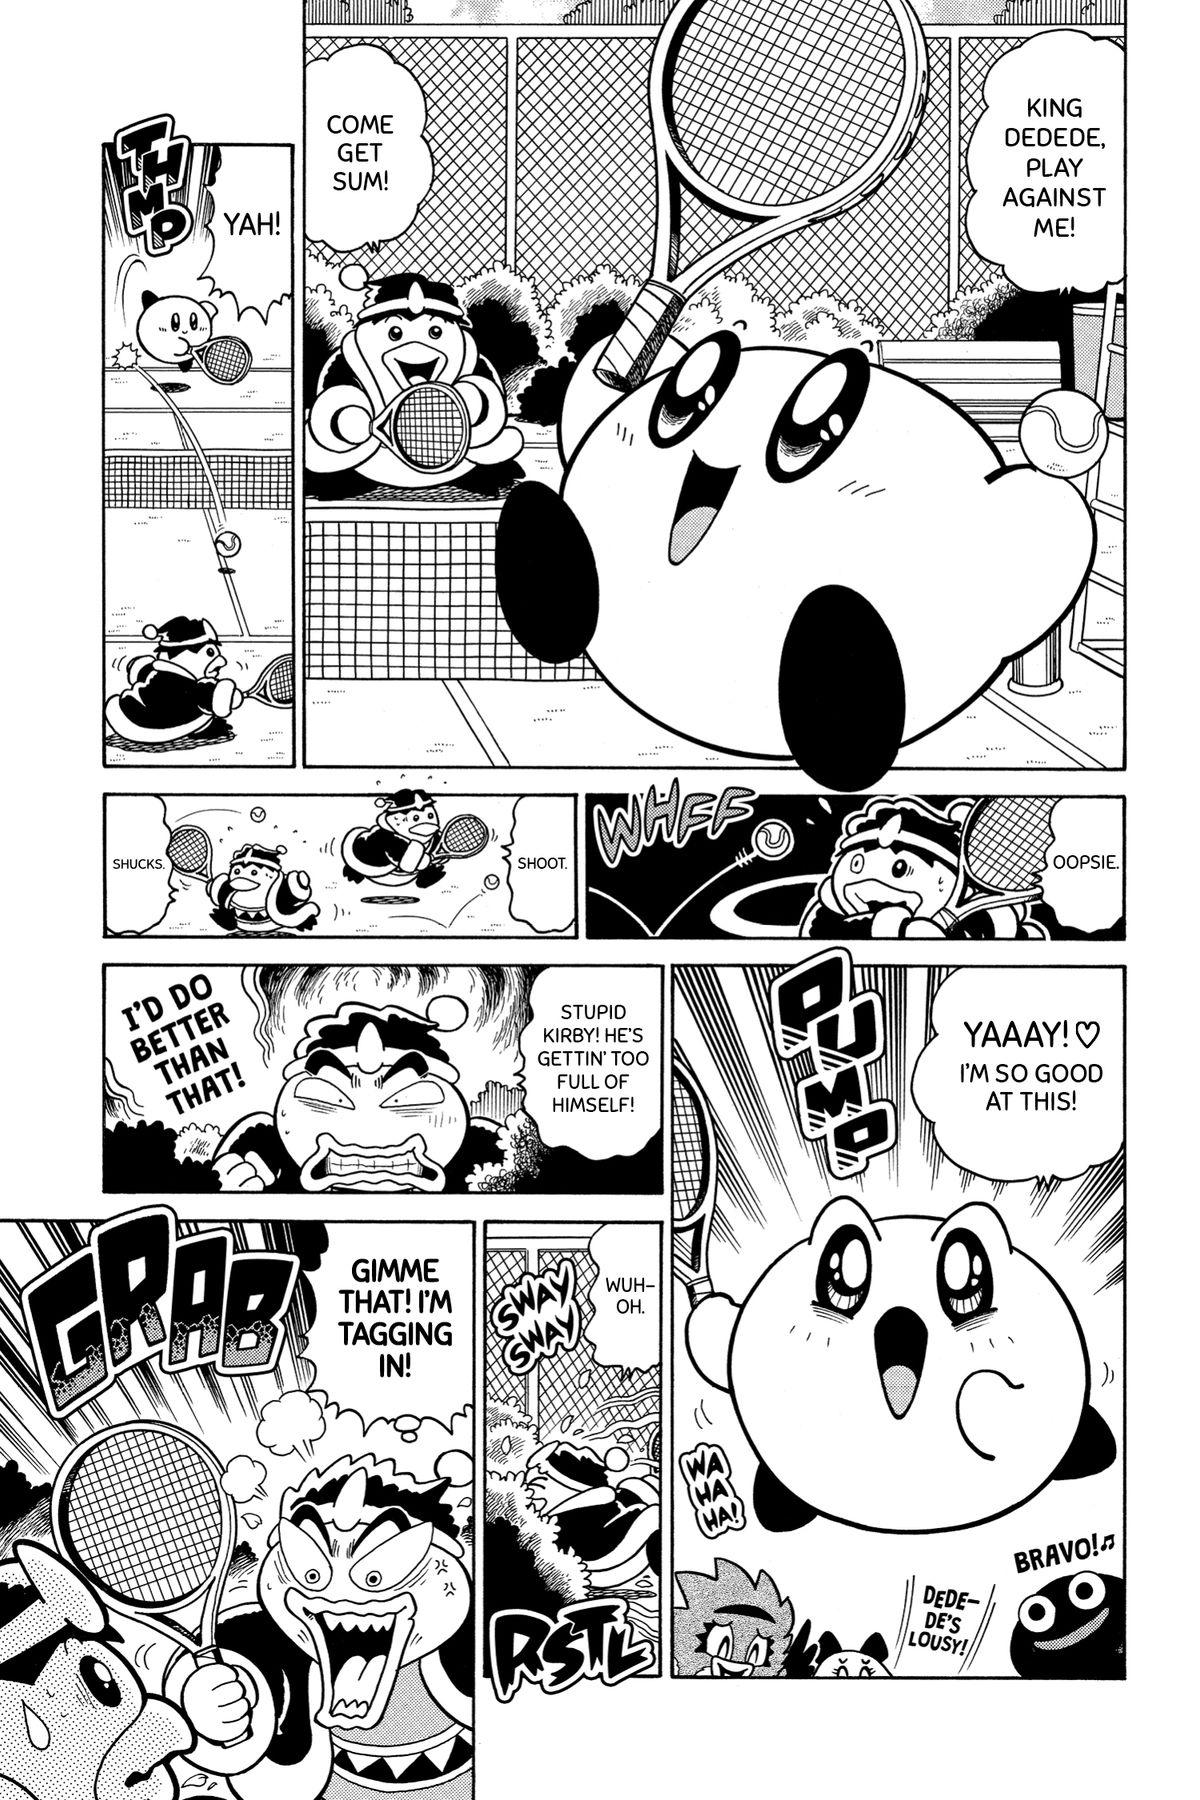 Kirby is very good at tennis, and very excited to be good at tennis, inspiring the fury of his opponent, King Dedede in Kirby Manga Mania (2021).